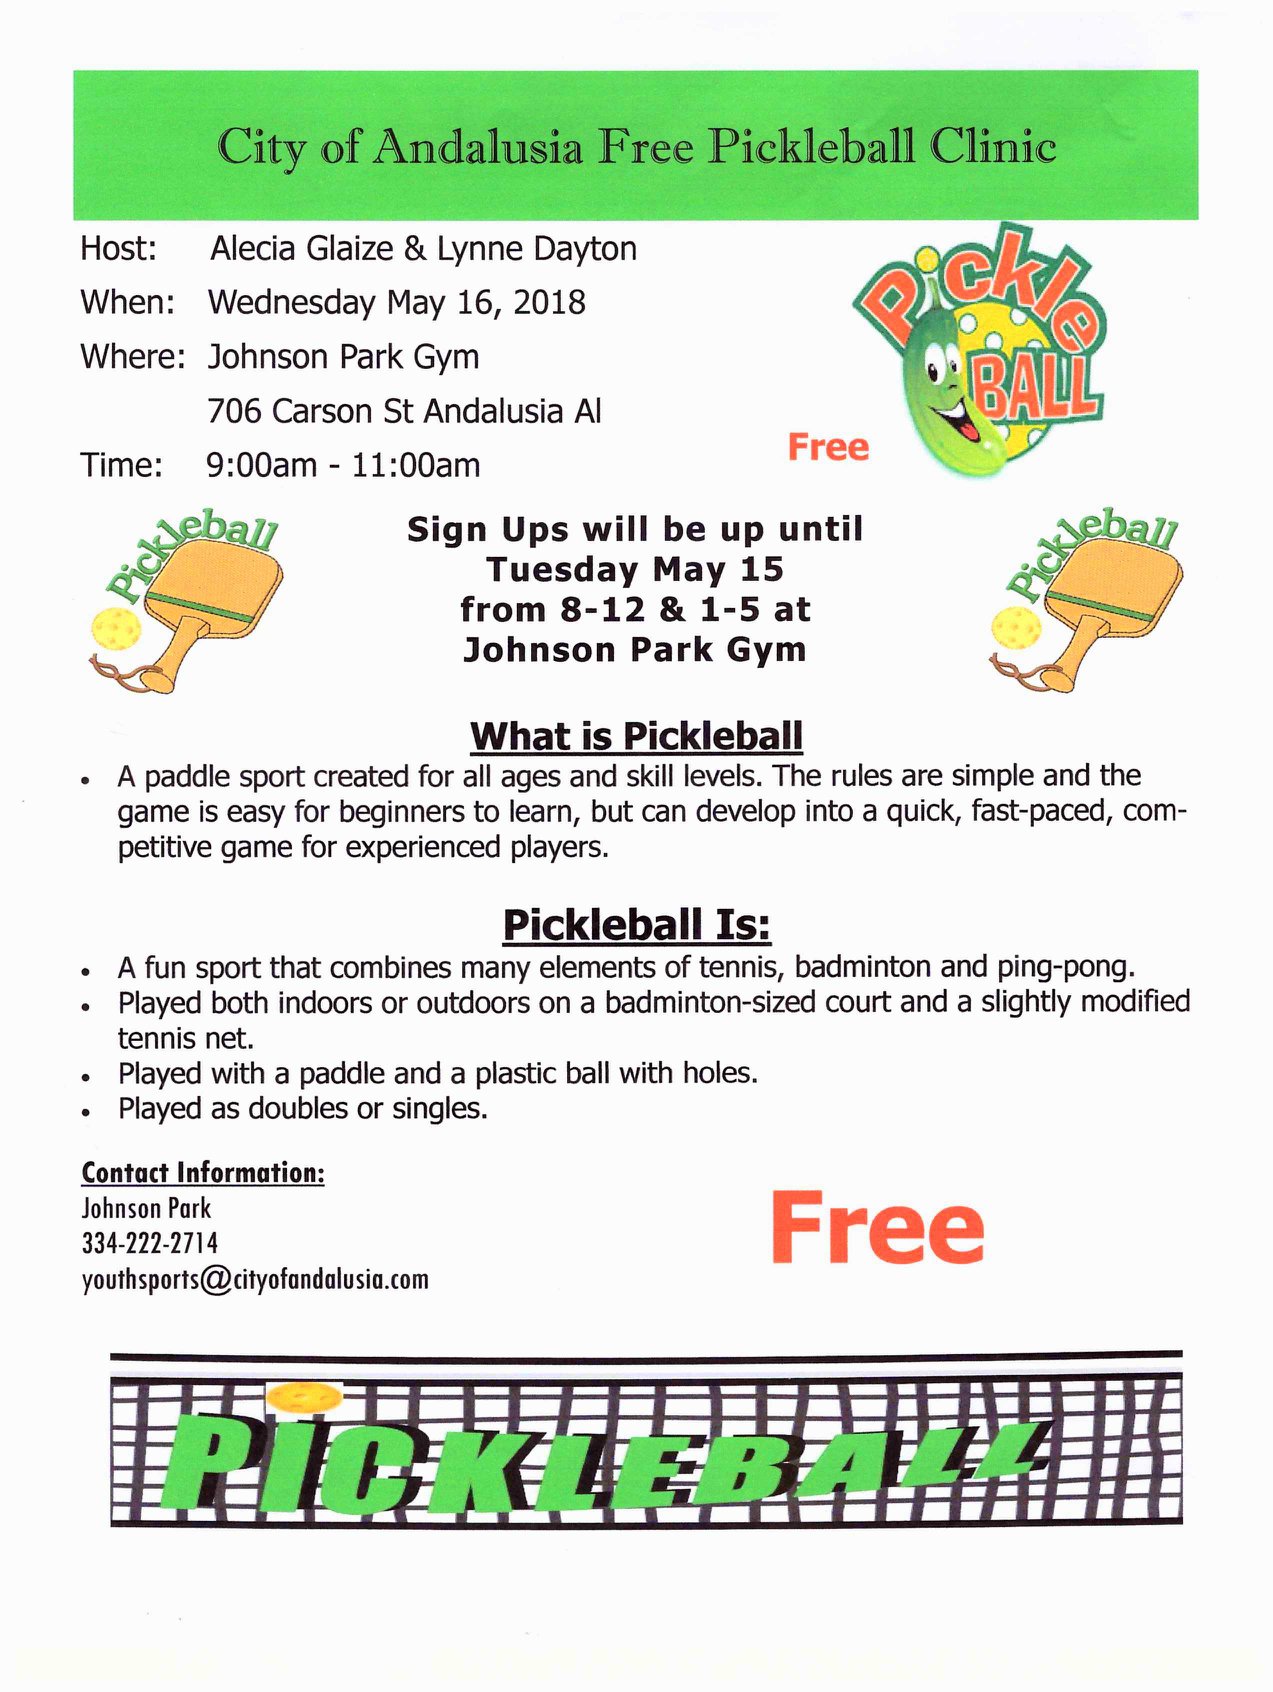 20180515 City of Andalusia Free Pickleball Clinic